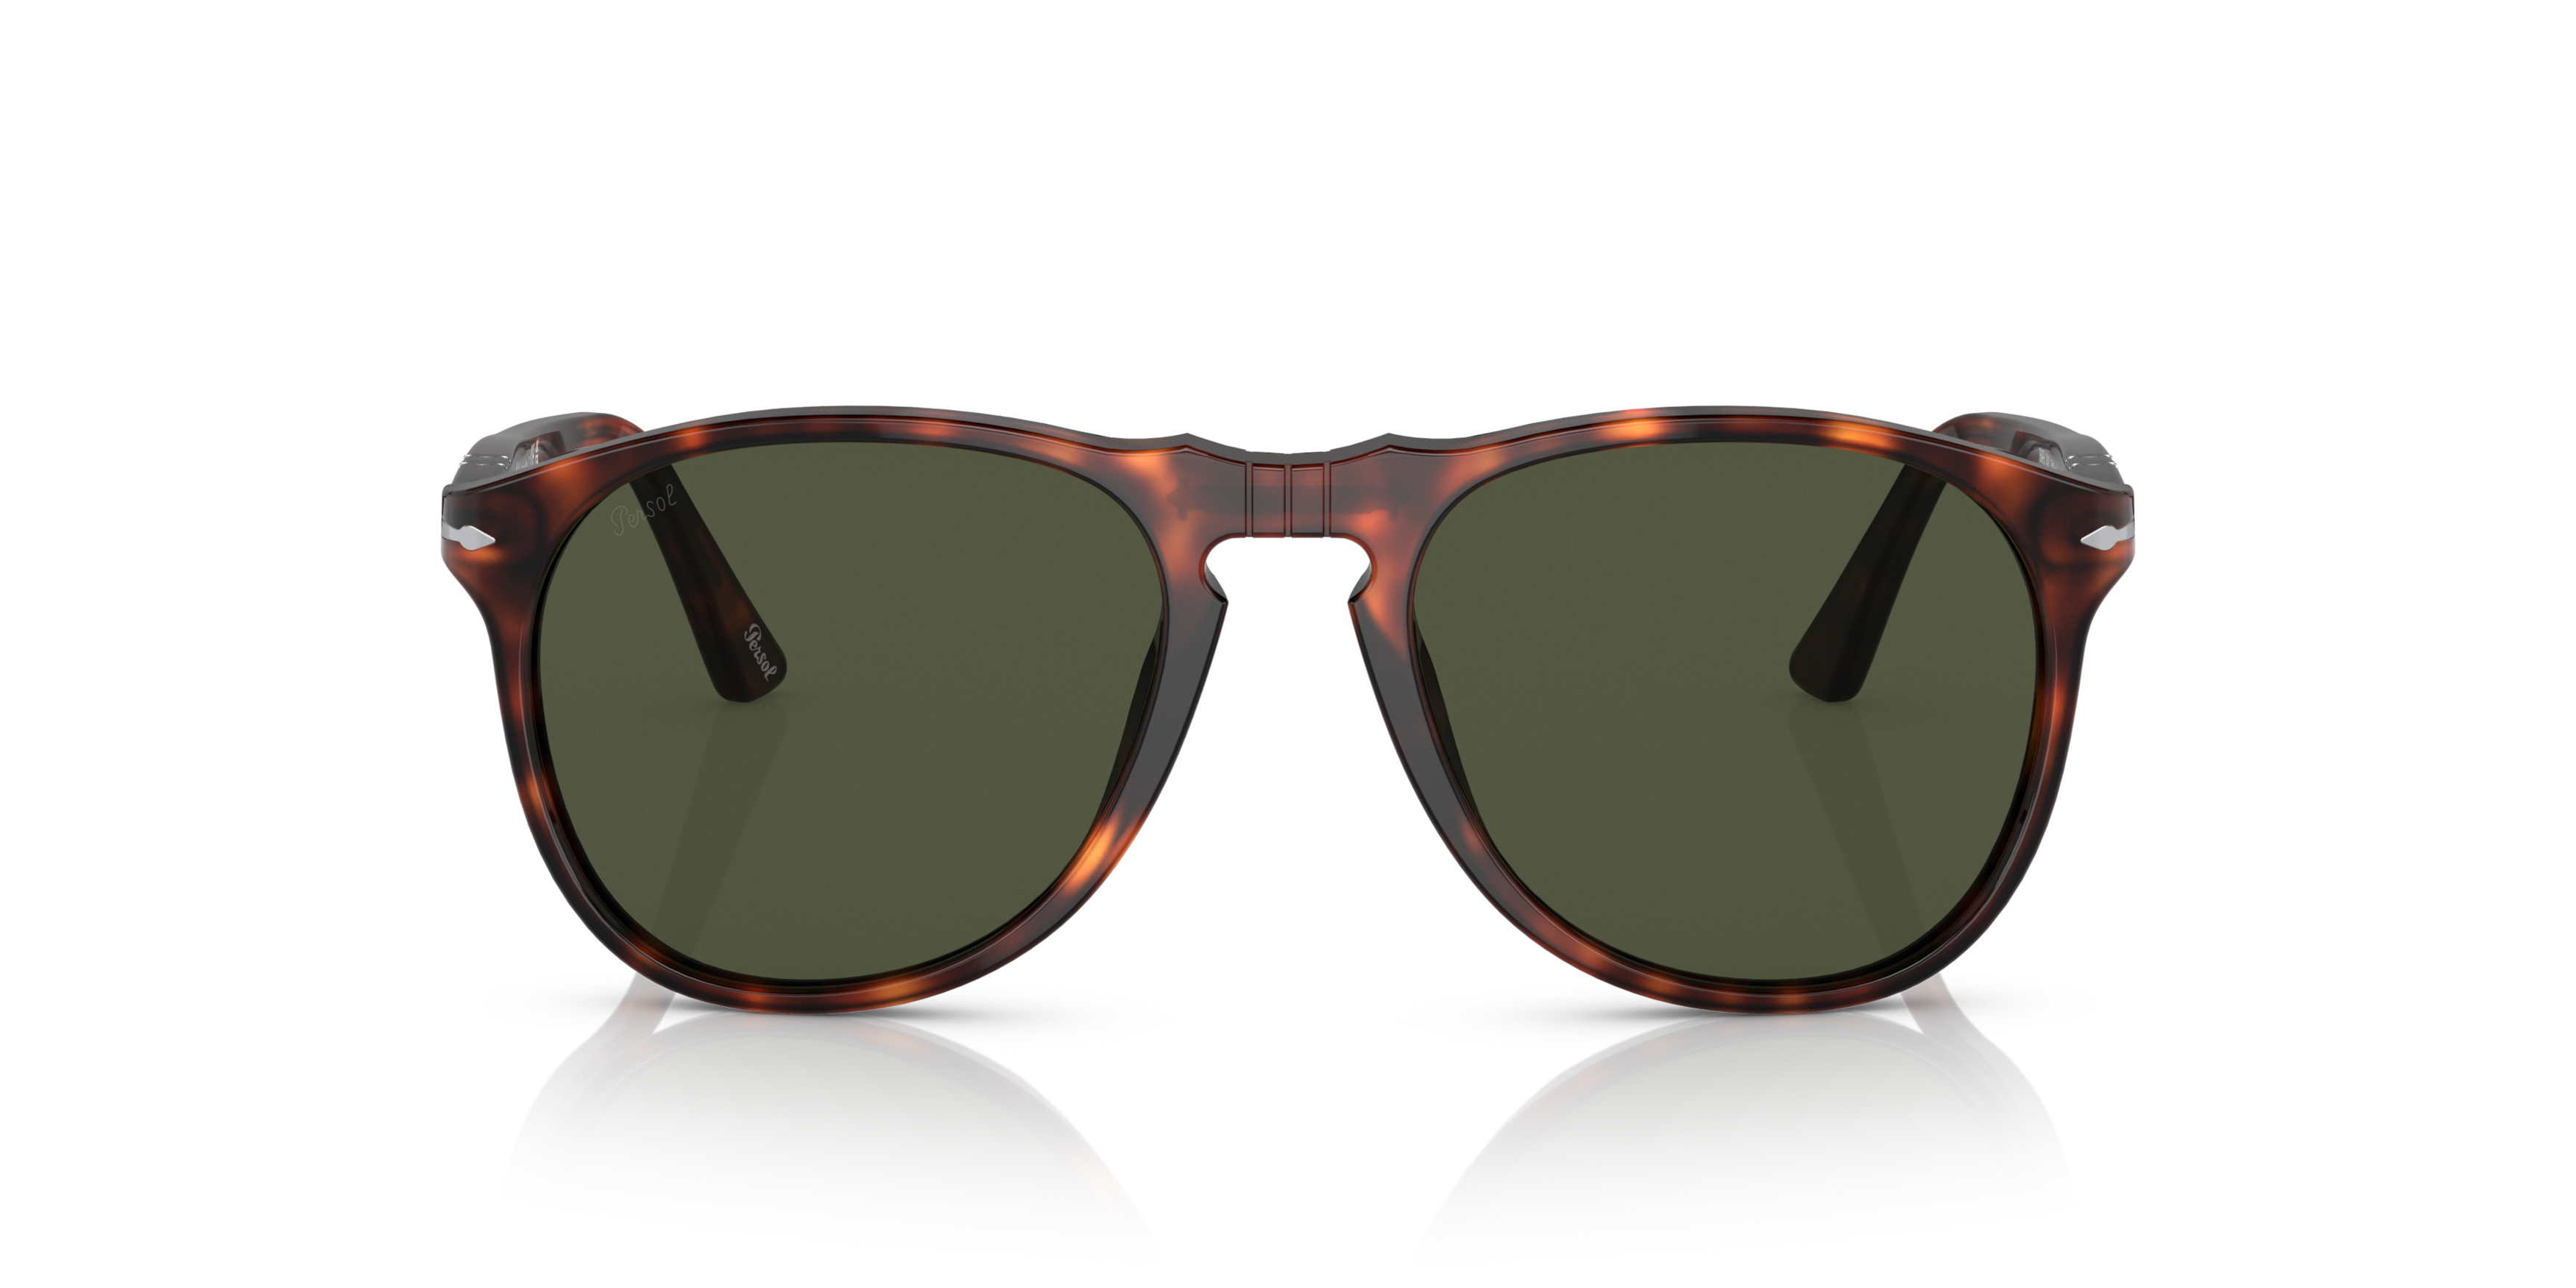 [products.image.front] Persol 0PO9649S 24/31